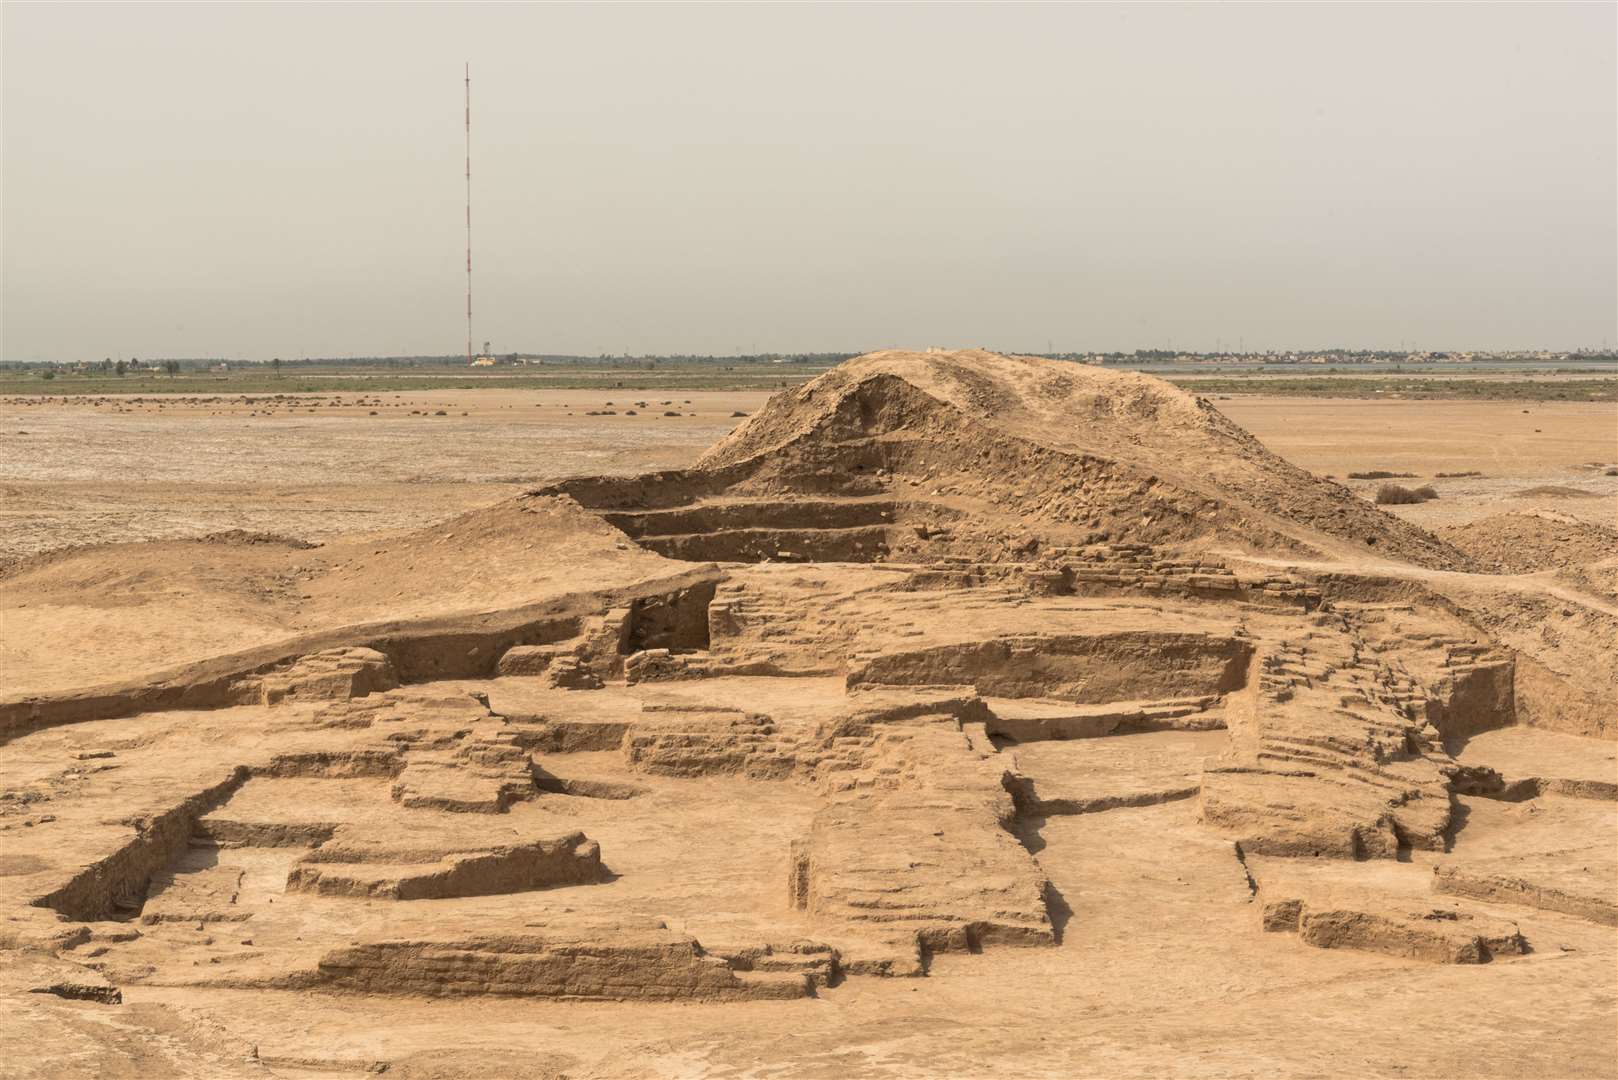 The Temple of Ningirsu. A view of the BritishMuseum team’s excavations and in the background a 19thcentury spoil heaptowering abovethe archaeologicalremains (Dani Tagen/The Girsu Project/PA)